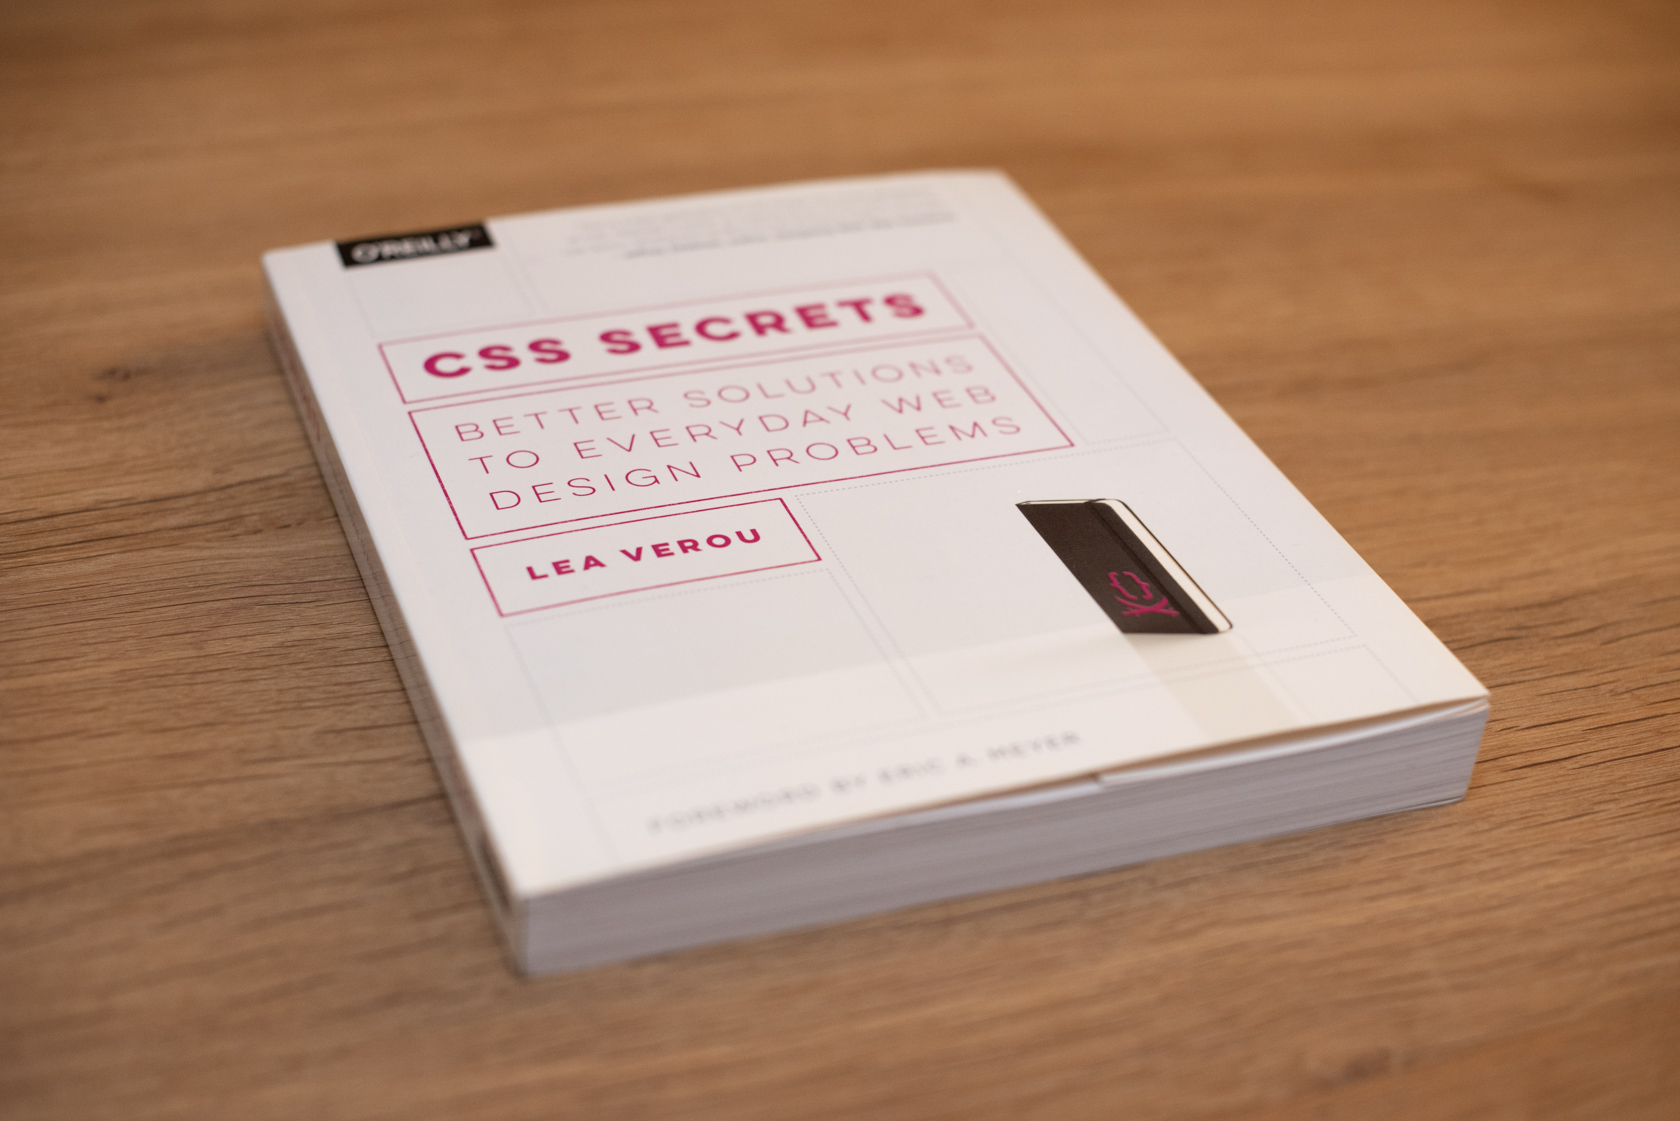 A photo of the CSS Secrets book, closed, on a wooden surface